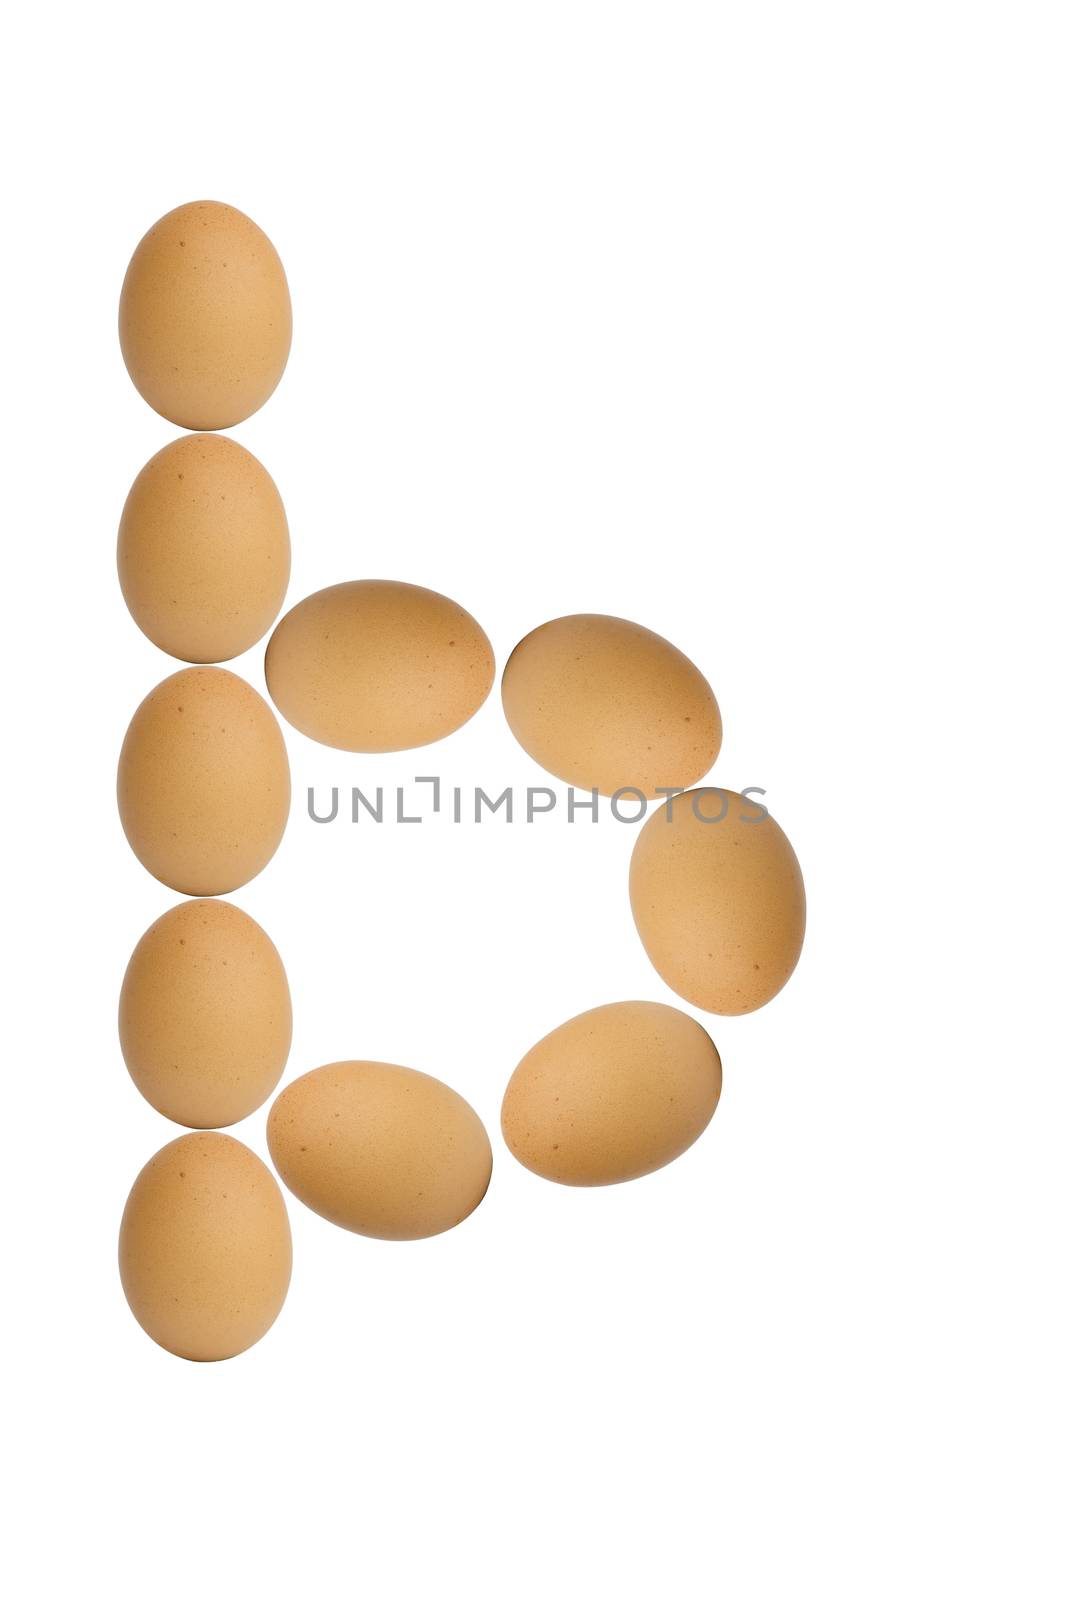 Alphabets  A to Z from brown eggs alphabet isolated on white background, b